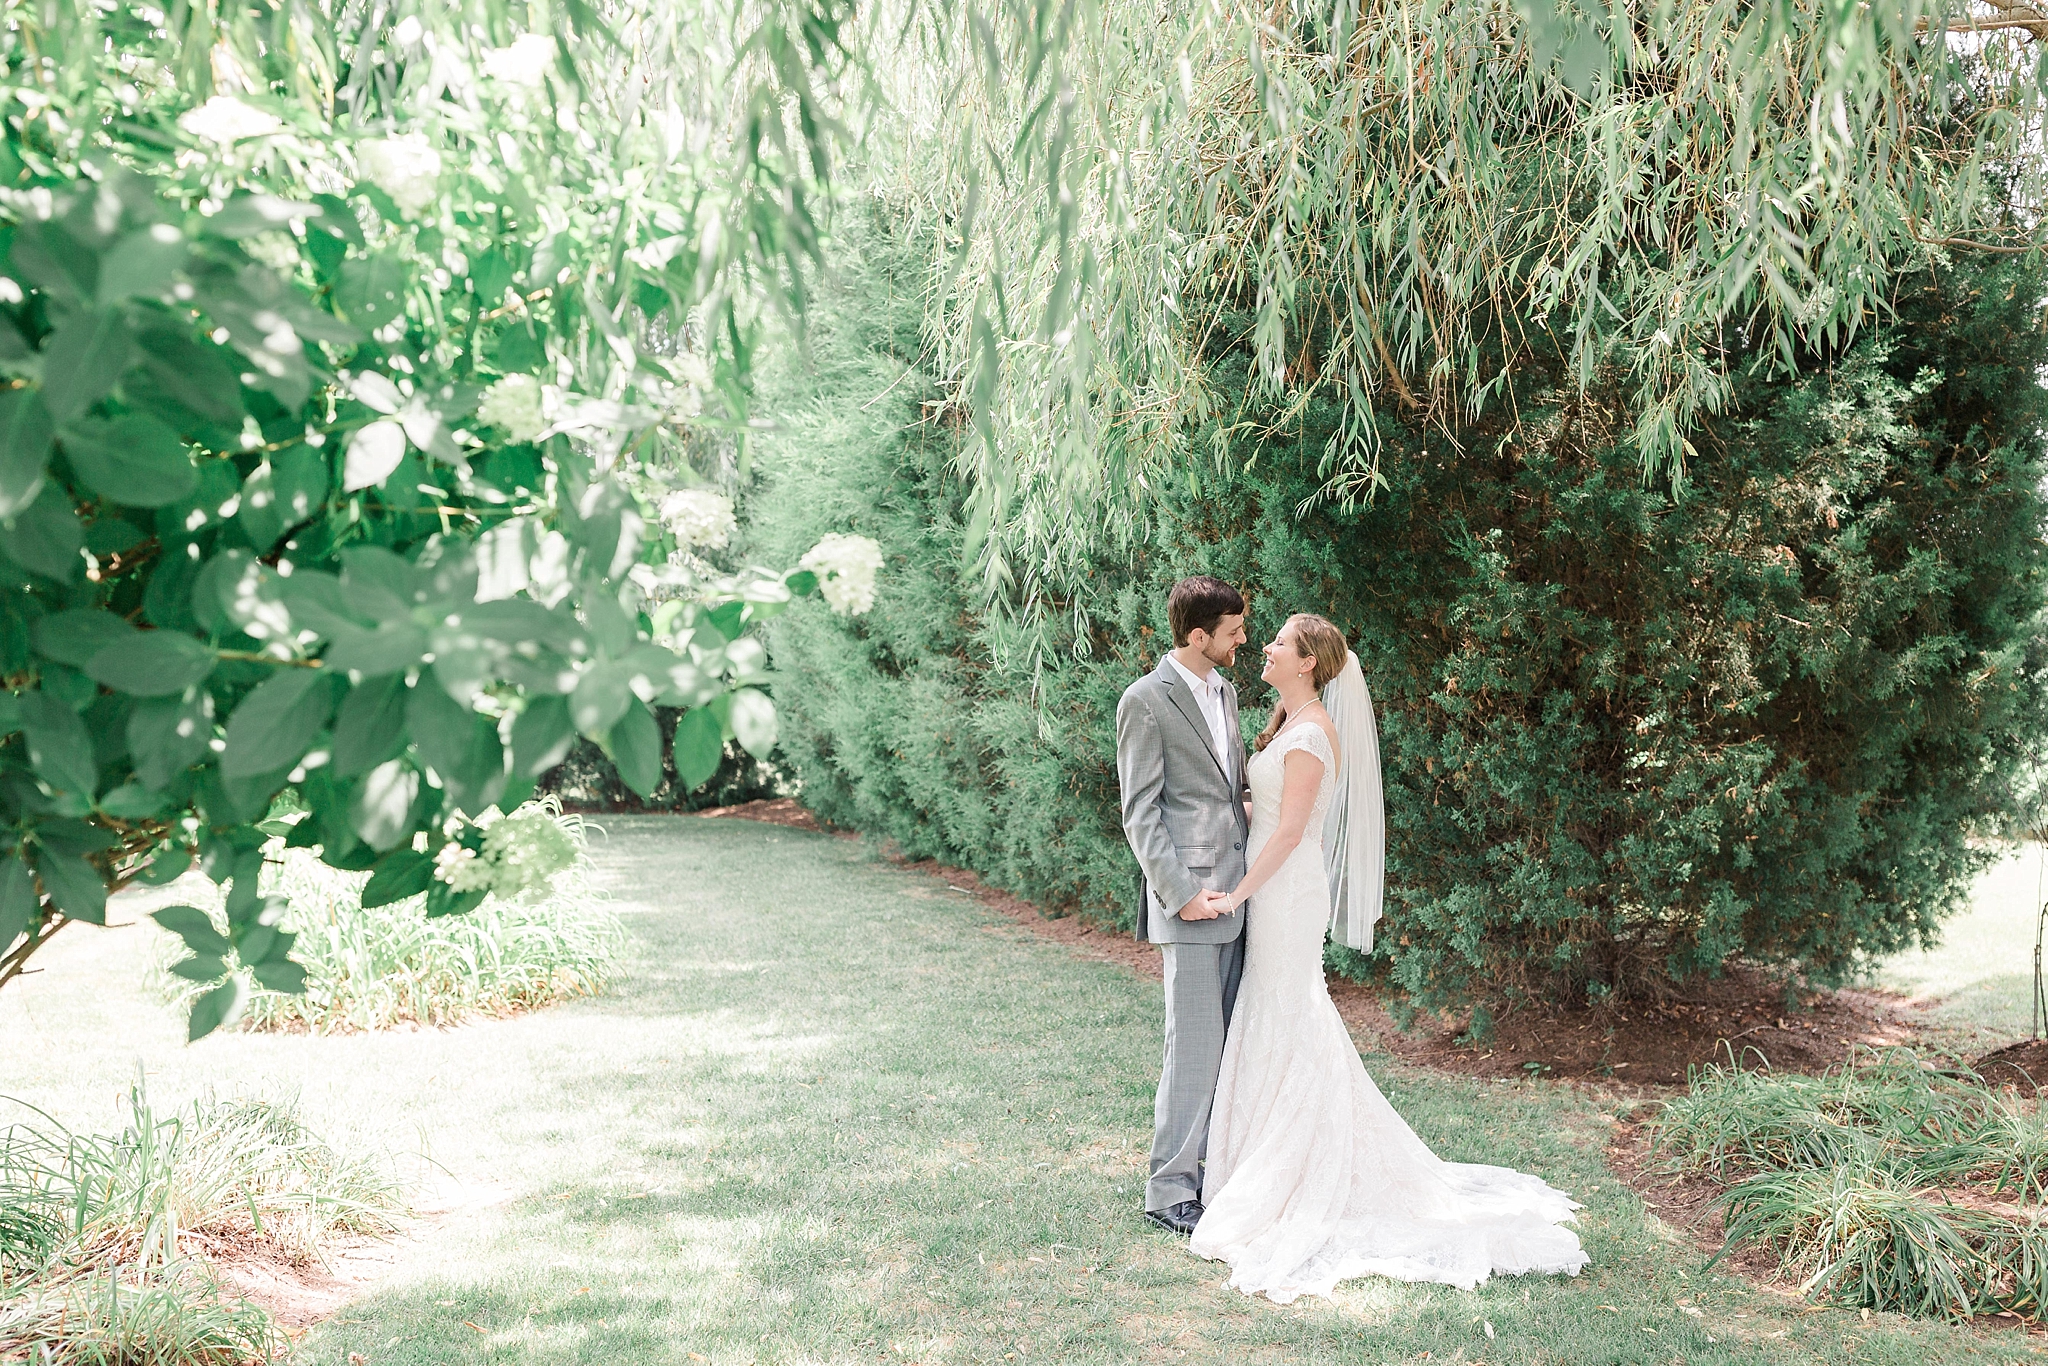 A sweet summer wedding is captured at The Inn at Huntingfield Creek in Rock Hall, MD on the Eastern Shore by Washington, DC photographer, Alicia Lacey.